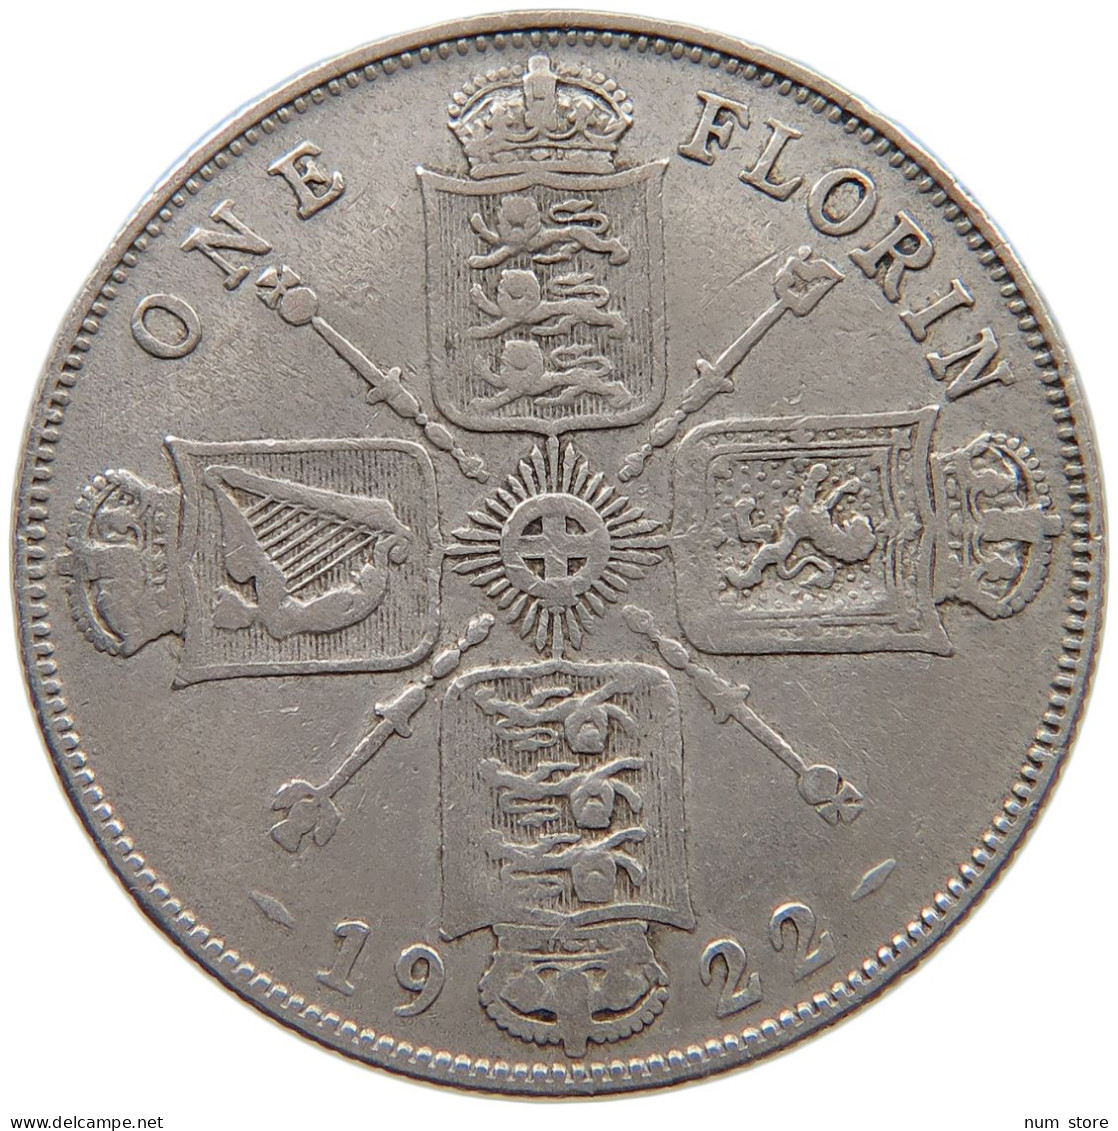 GREAT BRITAIN FLORIN 1922 George V. (1910-1936) #a073 0665 - J. 1 Florin / 2 Shillings